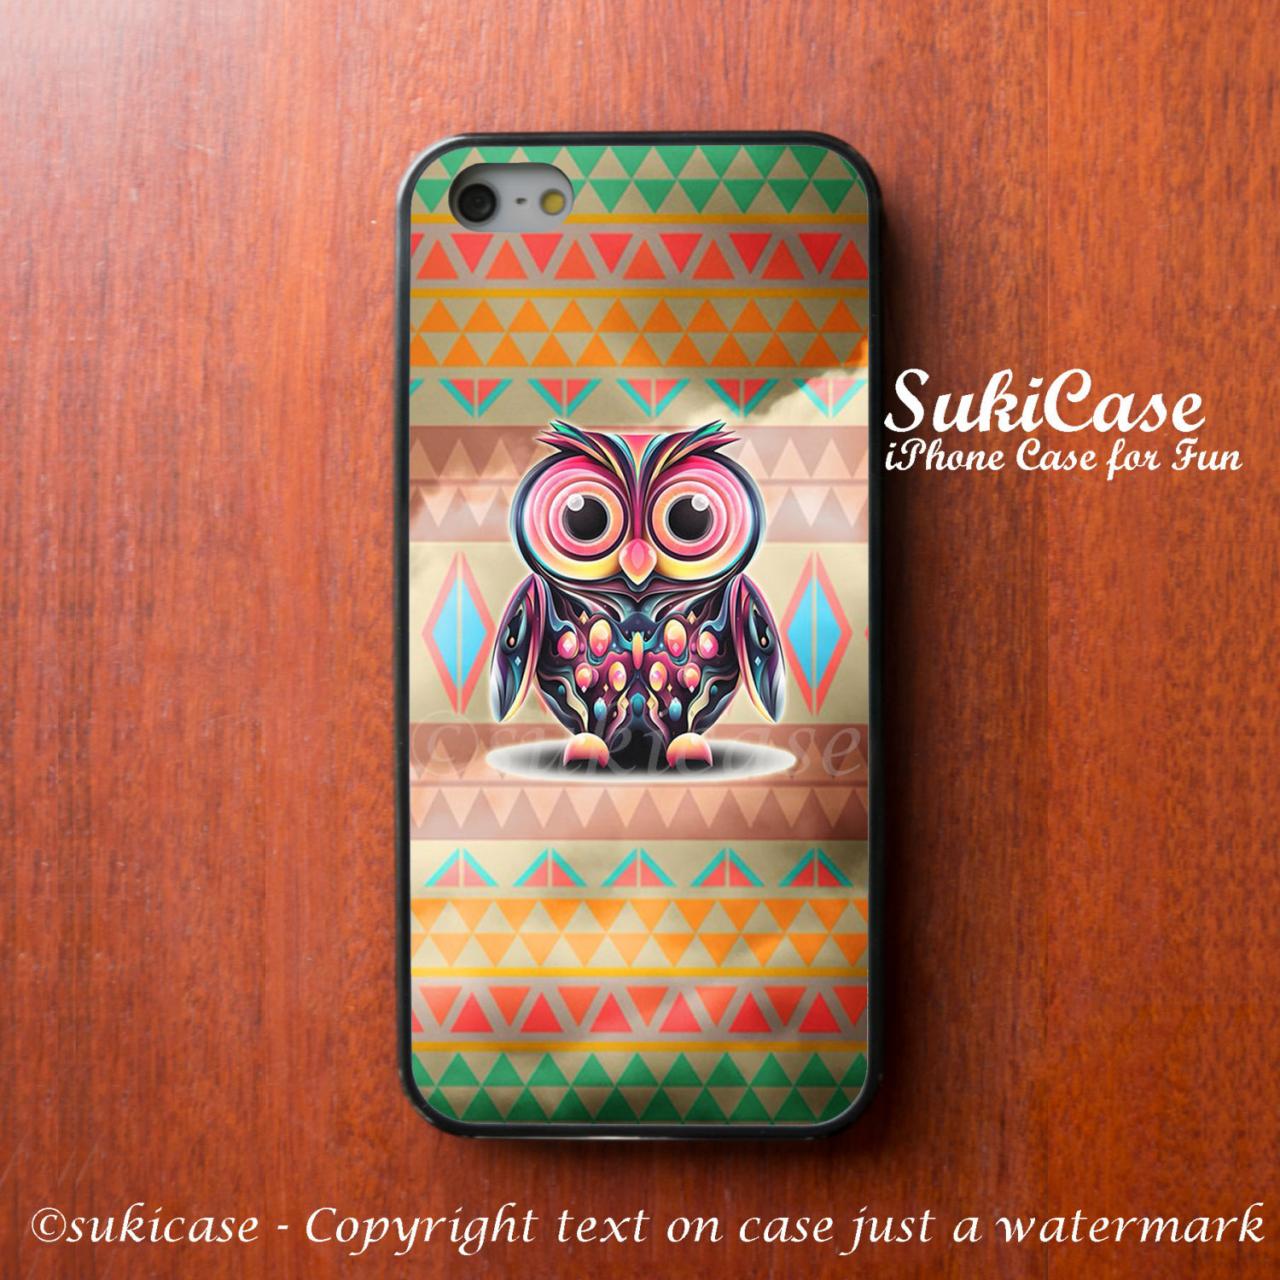 Iphone 5s Case Aztec Tribal Native Cute Owl Bird Iphone Case Iphone 5 Case Iphone 4 Case Samsung Galaxy S4 S3 Cover Iphone 5c Iphone 4s Case